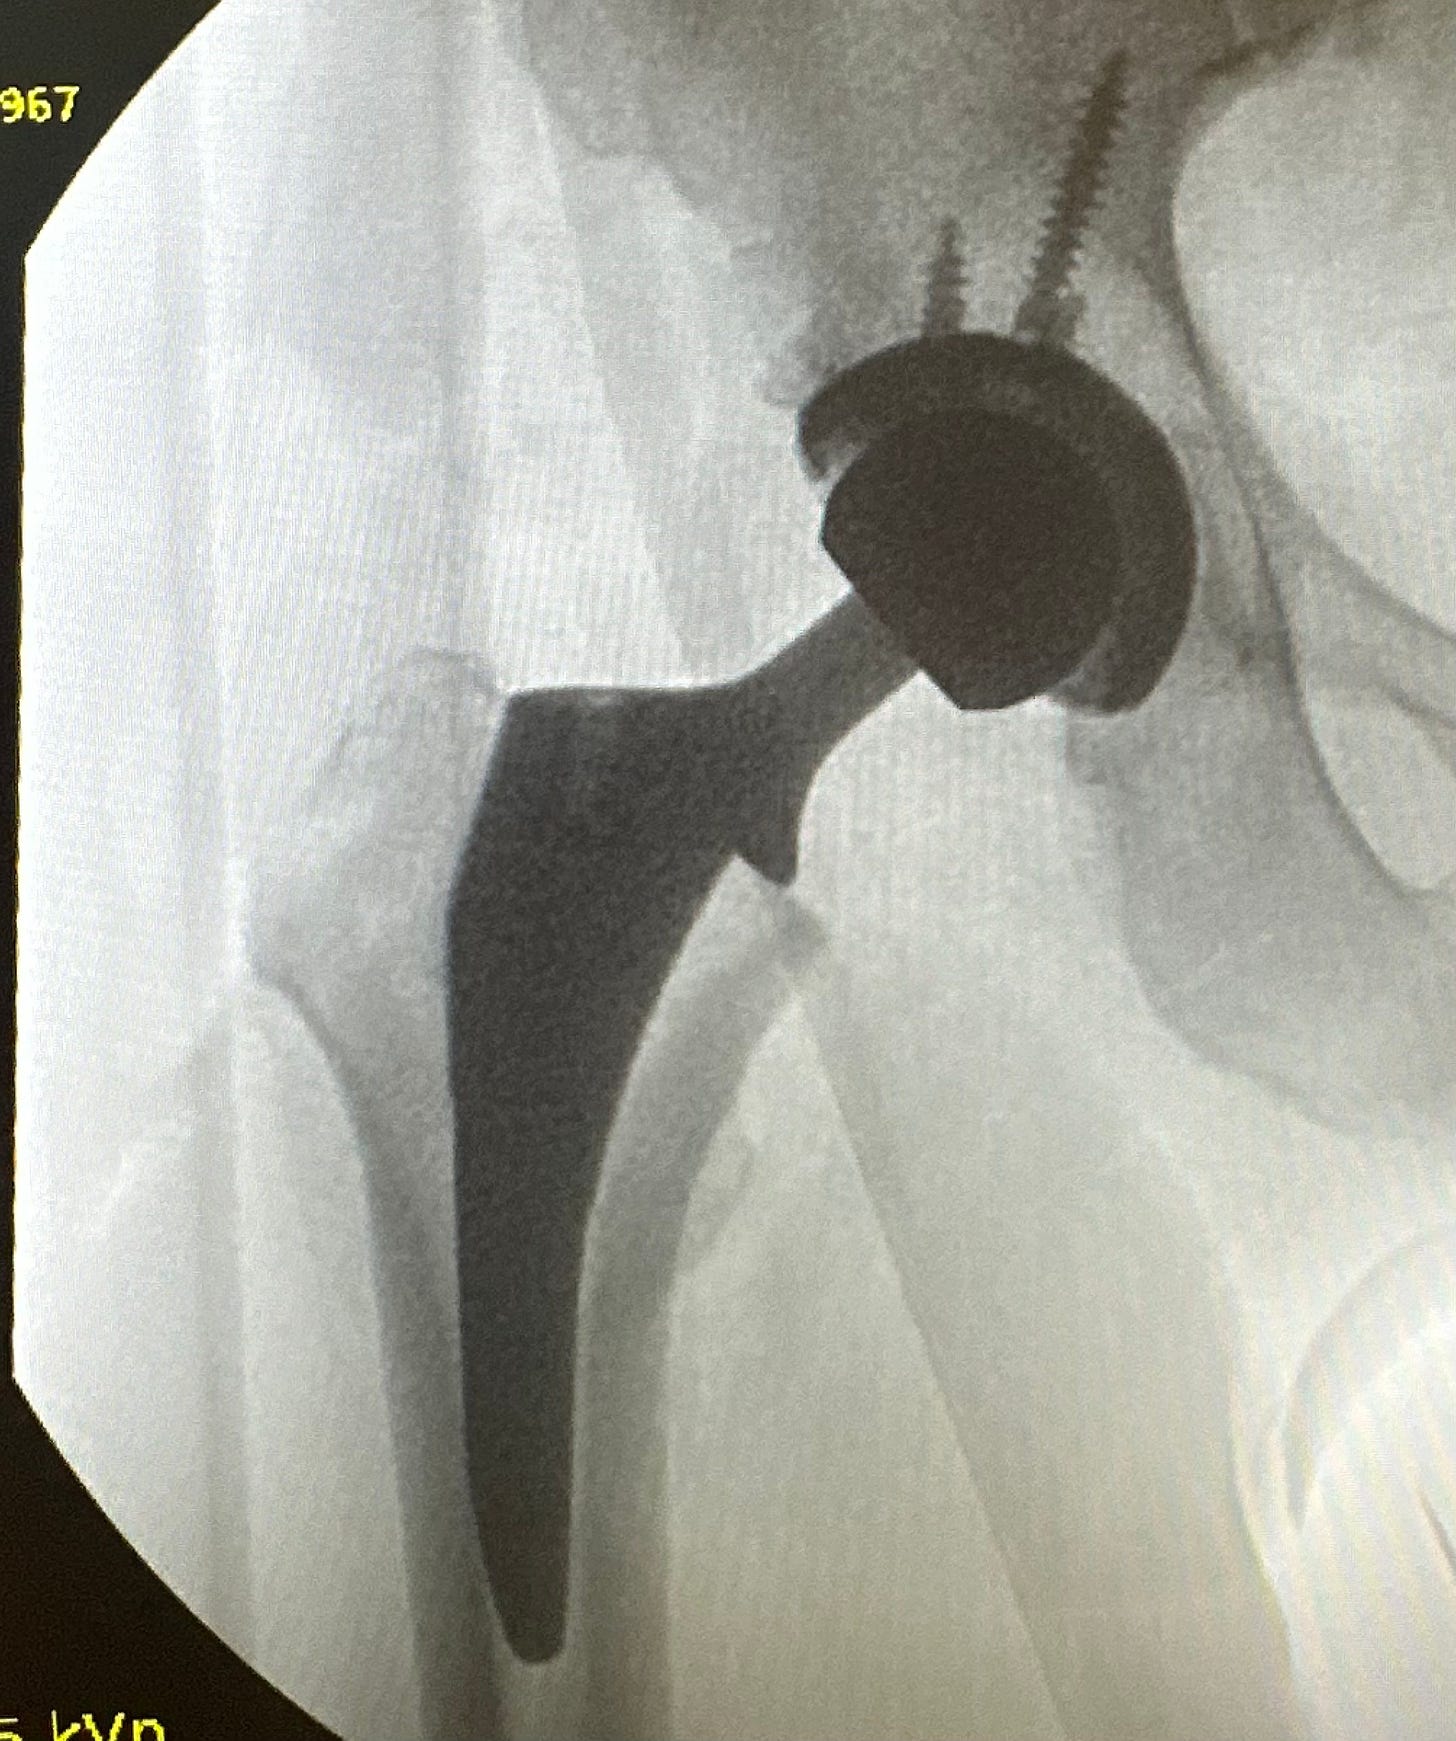 An x-ray of Jeff’s new hip.